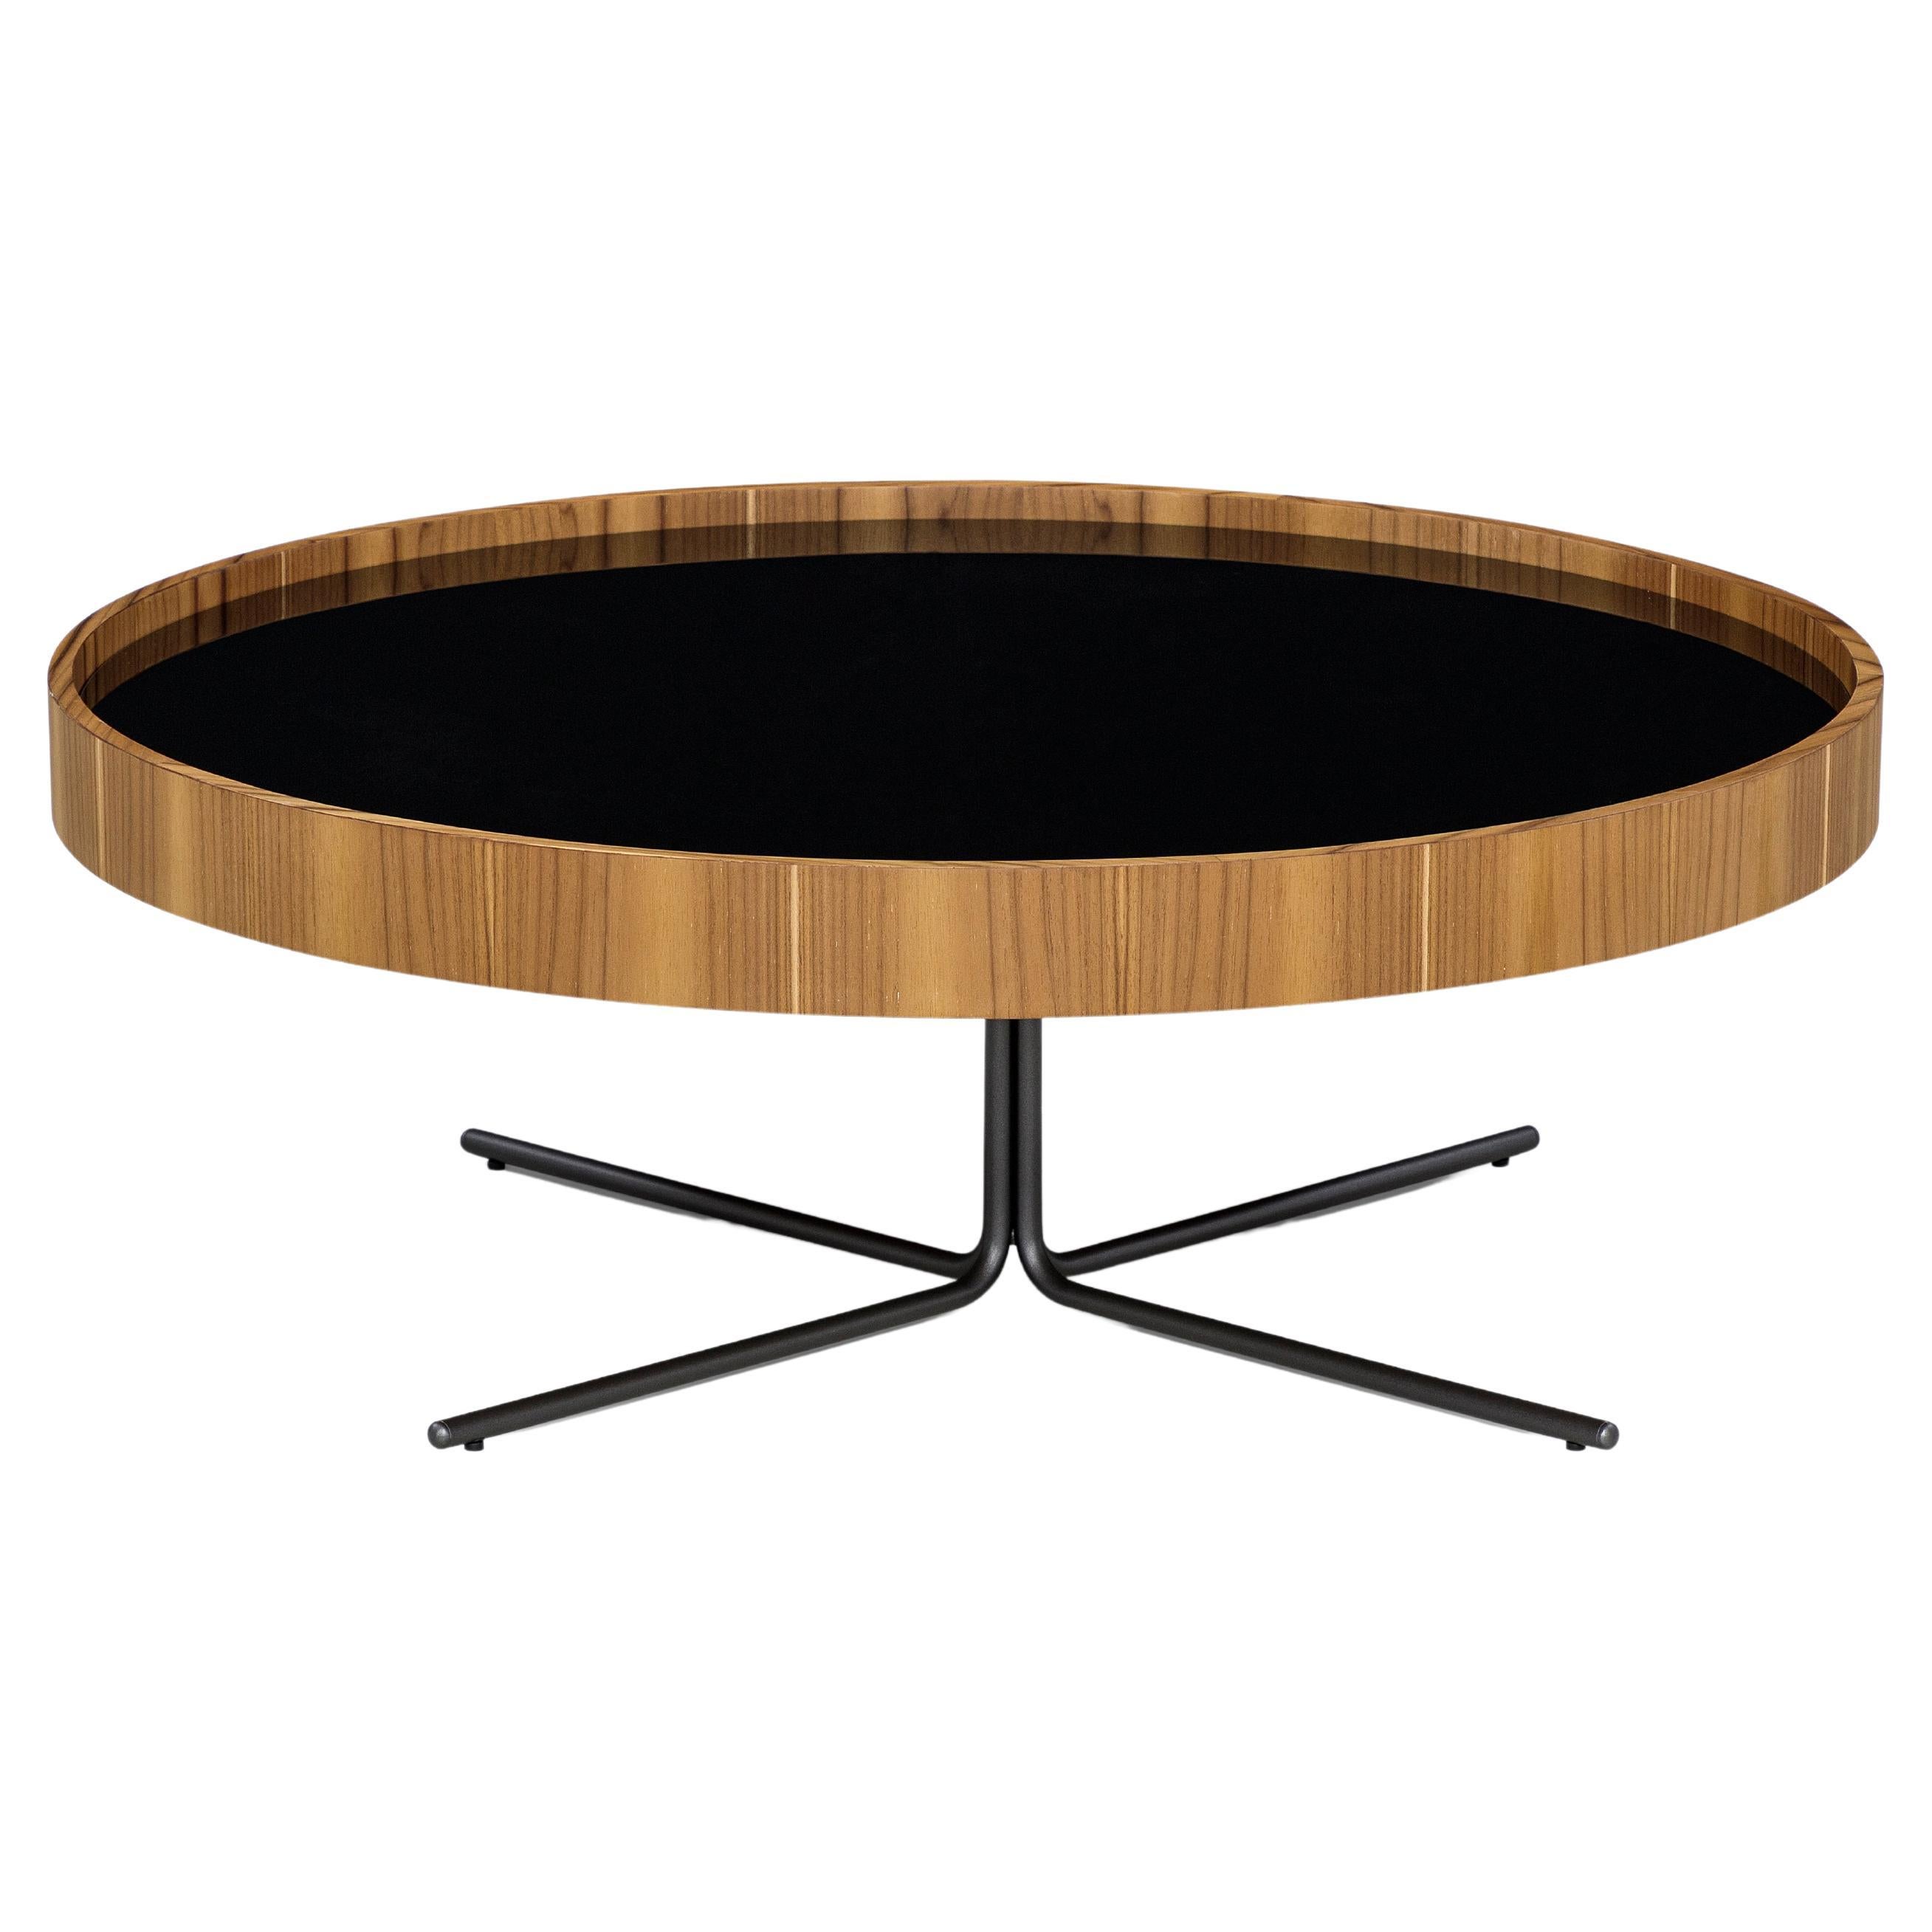 Regia Occasional Table in Teak Wood Finish Featuring Black Glass 39'' For Sale